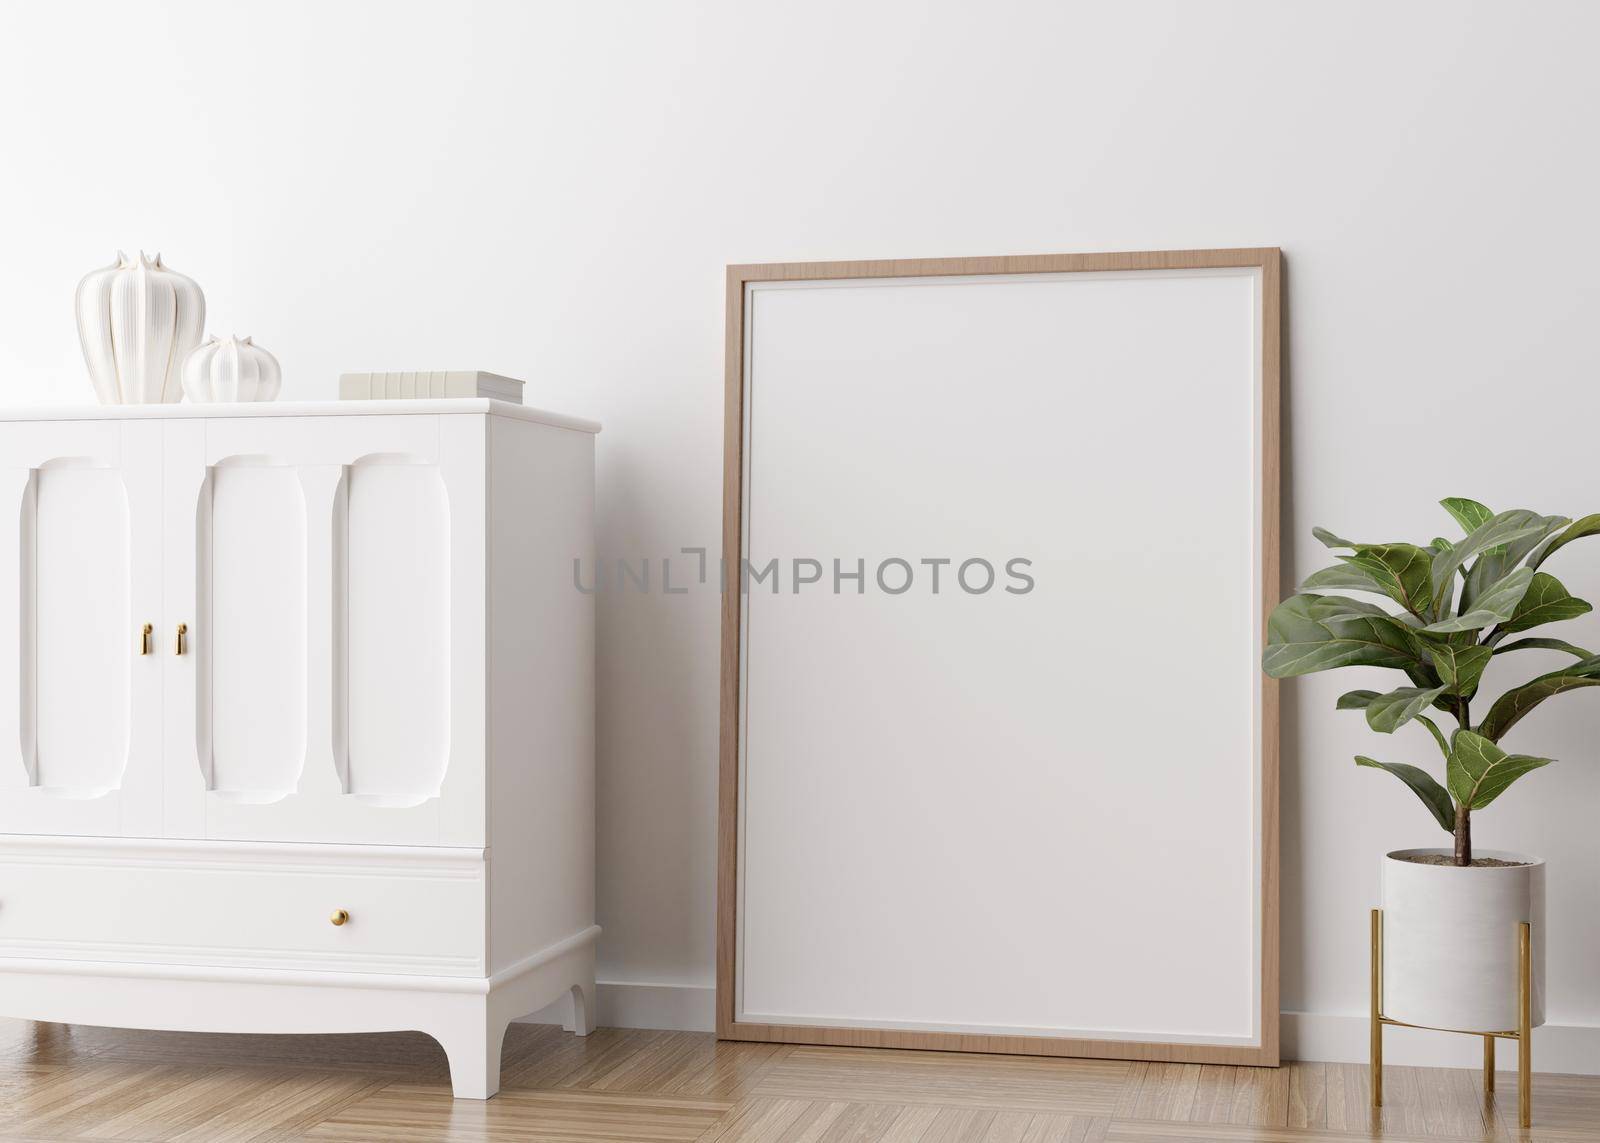 Empty vertical picture frame standing on parquet floor in modern living room. Mock up interior in minimalist, scandinavian style. Free space for picture. Console, plant, vases. 3D rendering